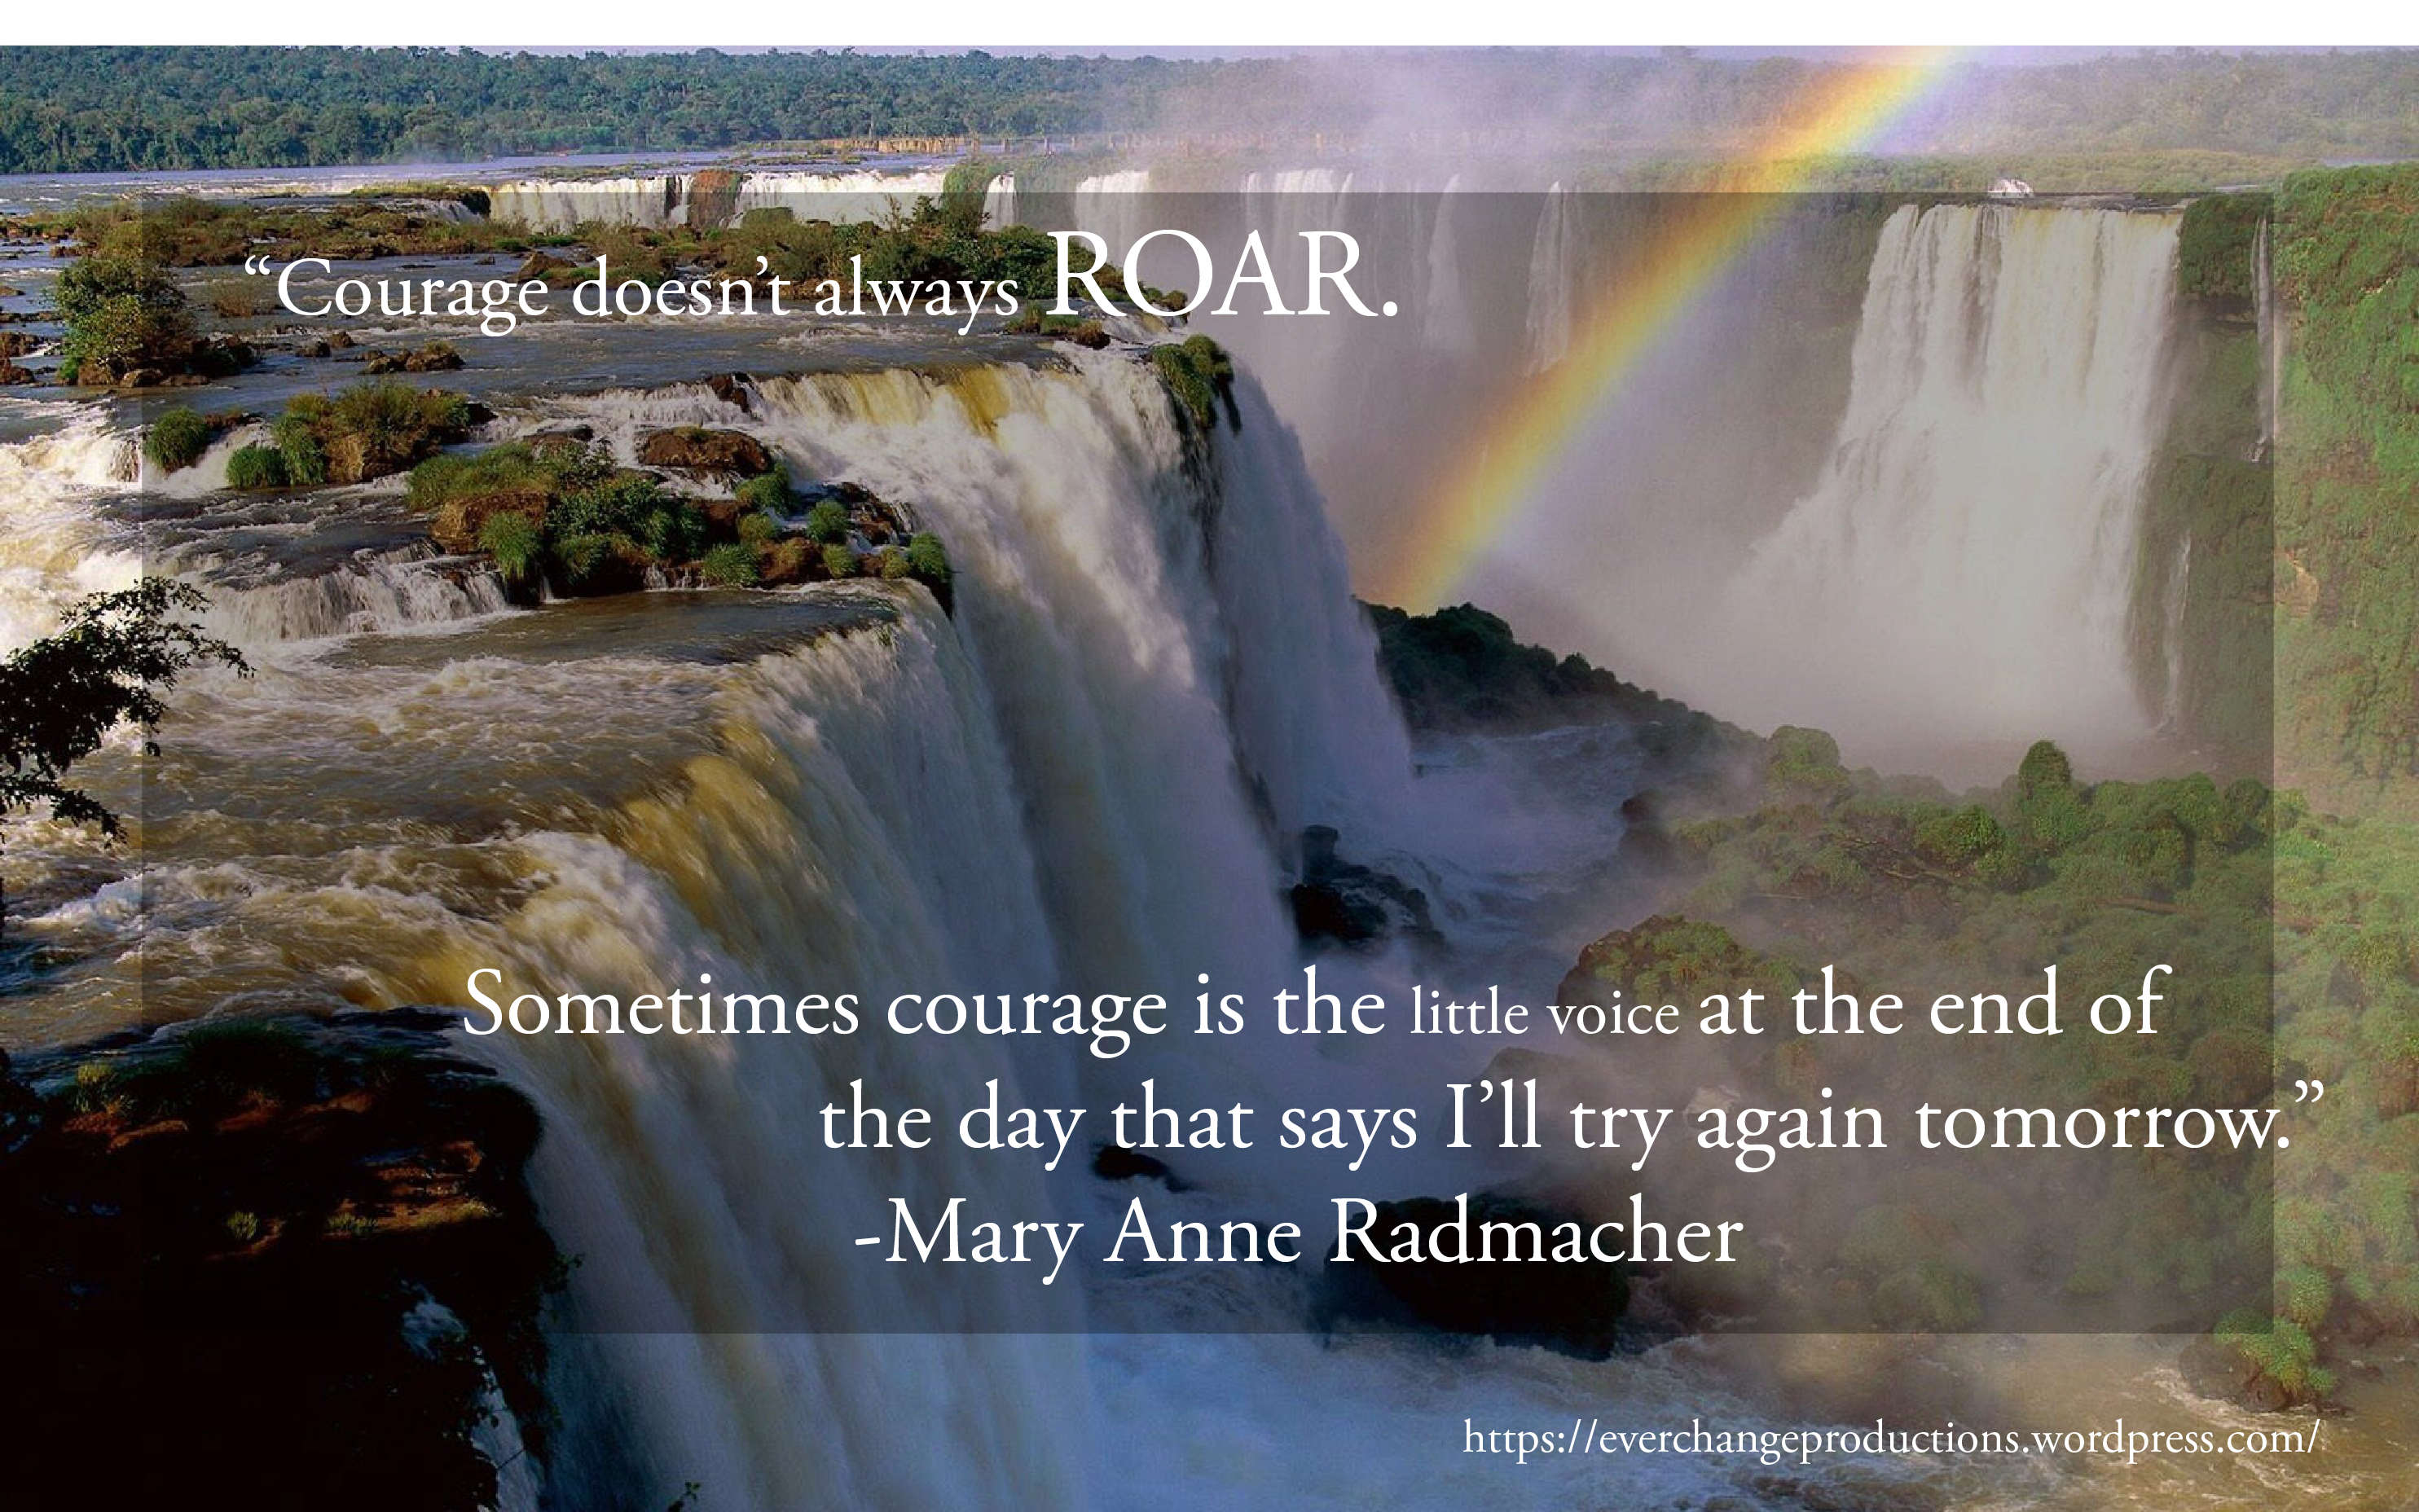 “Courage doesn't always roar. Sometimes courage is the little voice at the end of the day that says I'll try again tomorrow.” ― Mary Anne Radmacher motivational quote